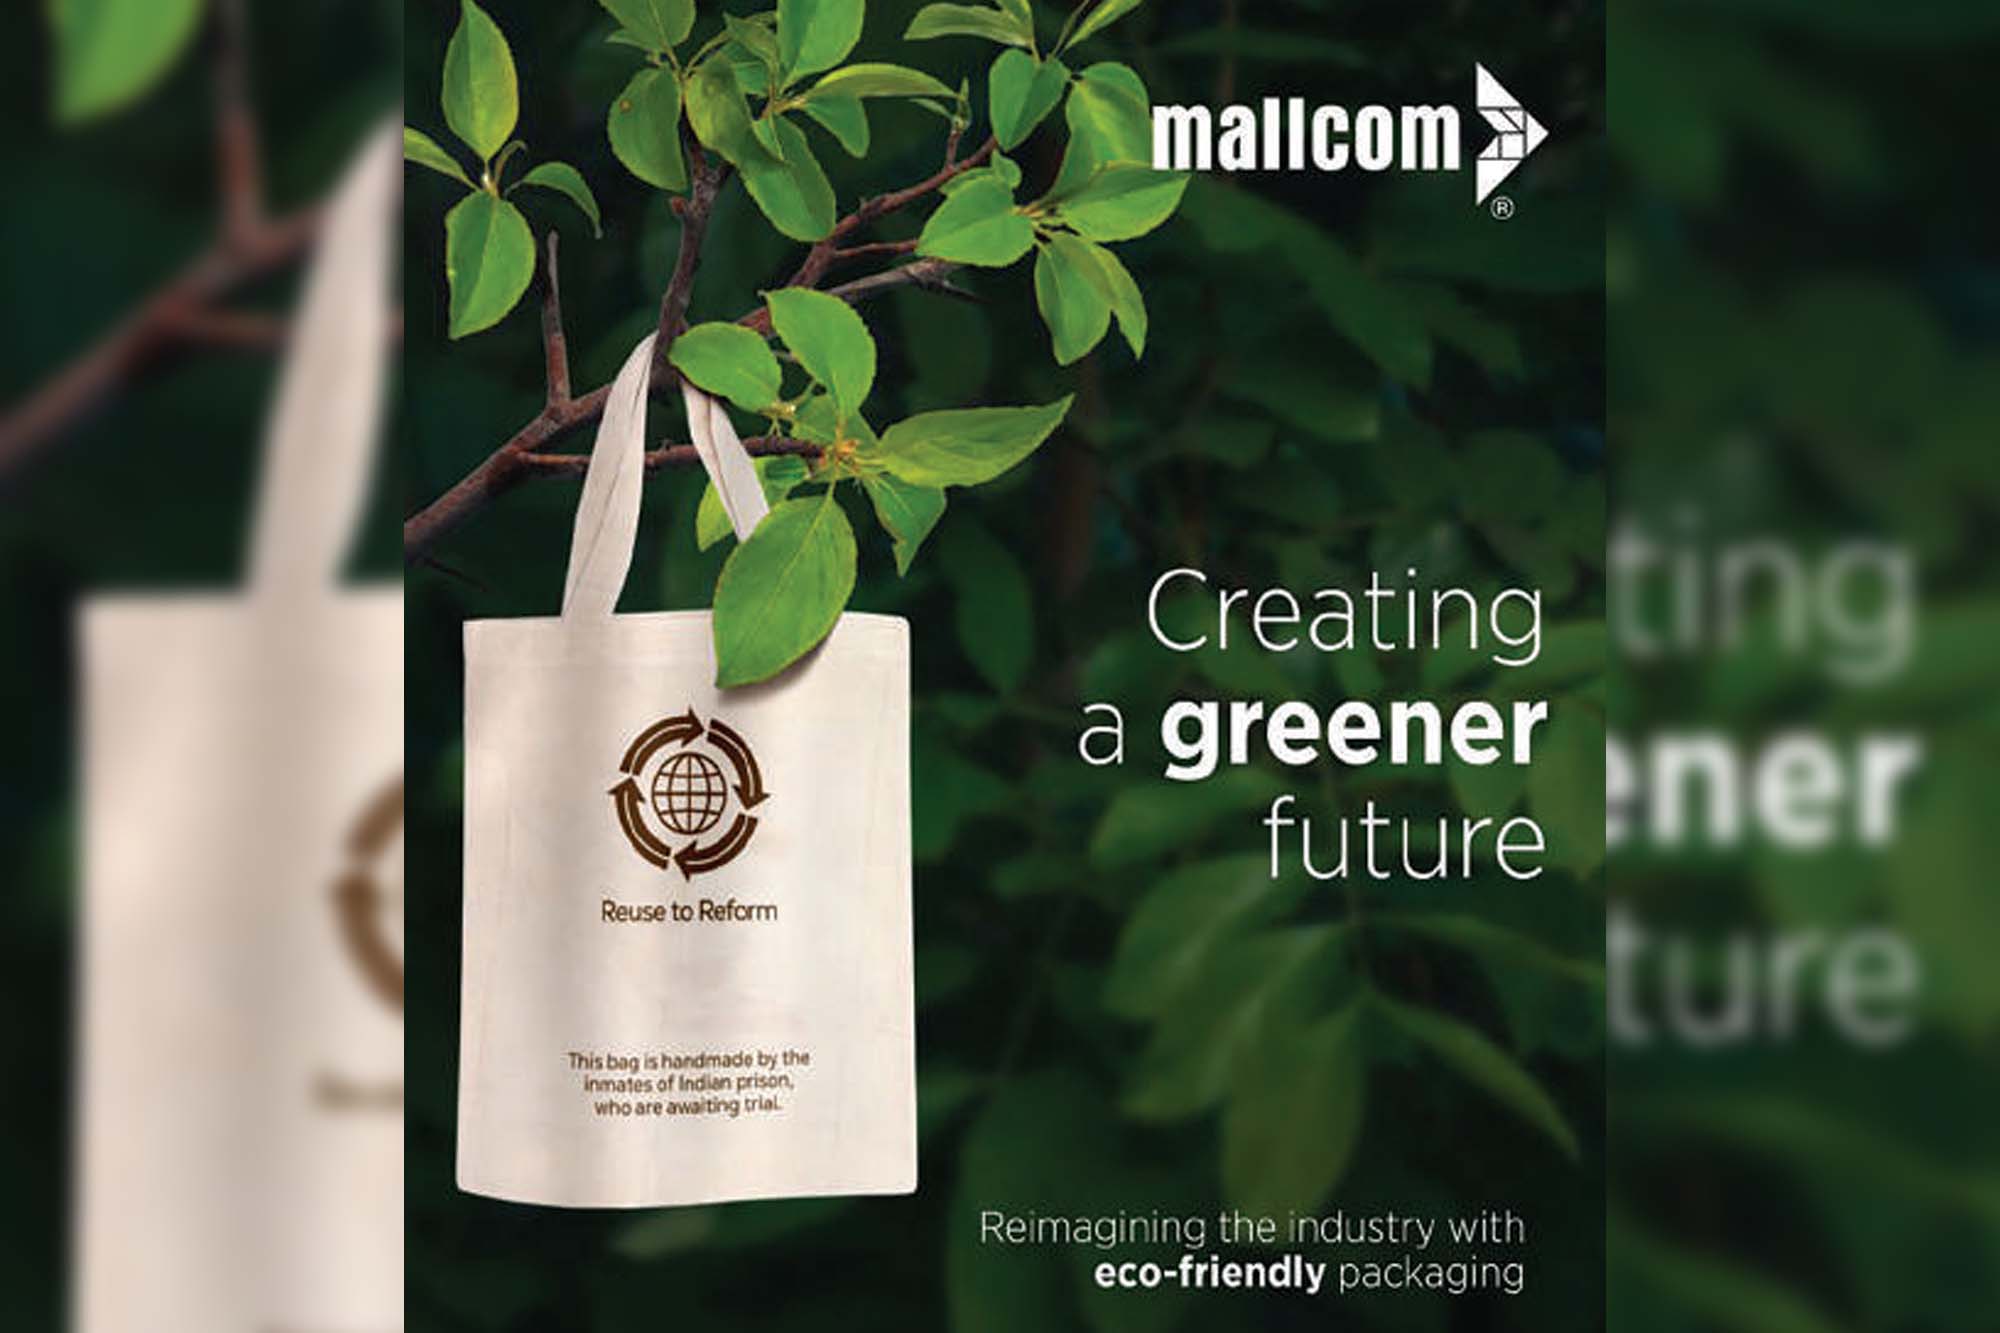 Mallcom leads the green revolution, focusing on sustainability and social engagement